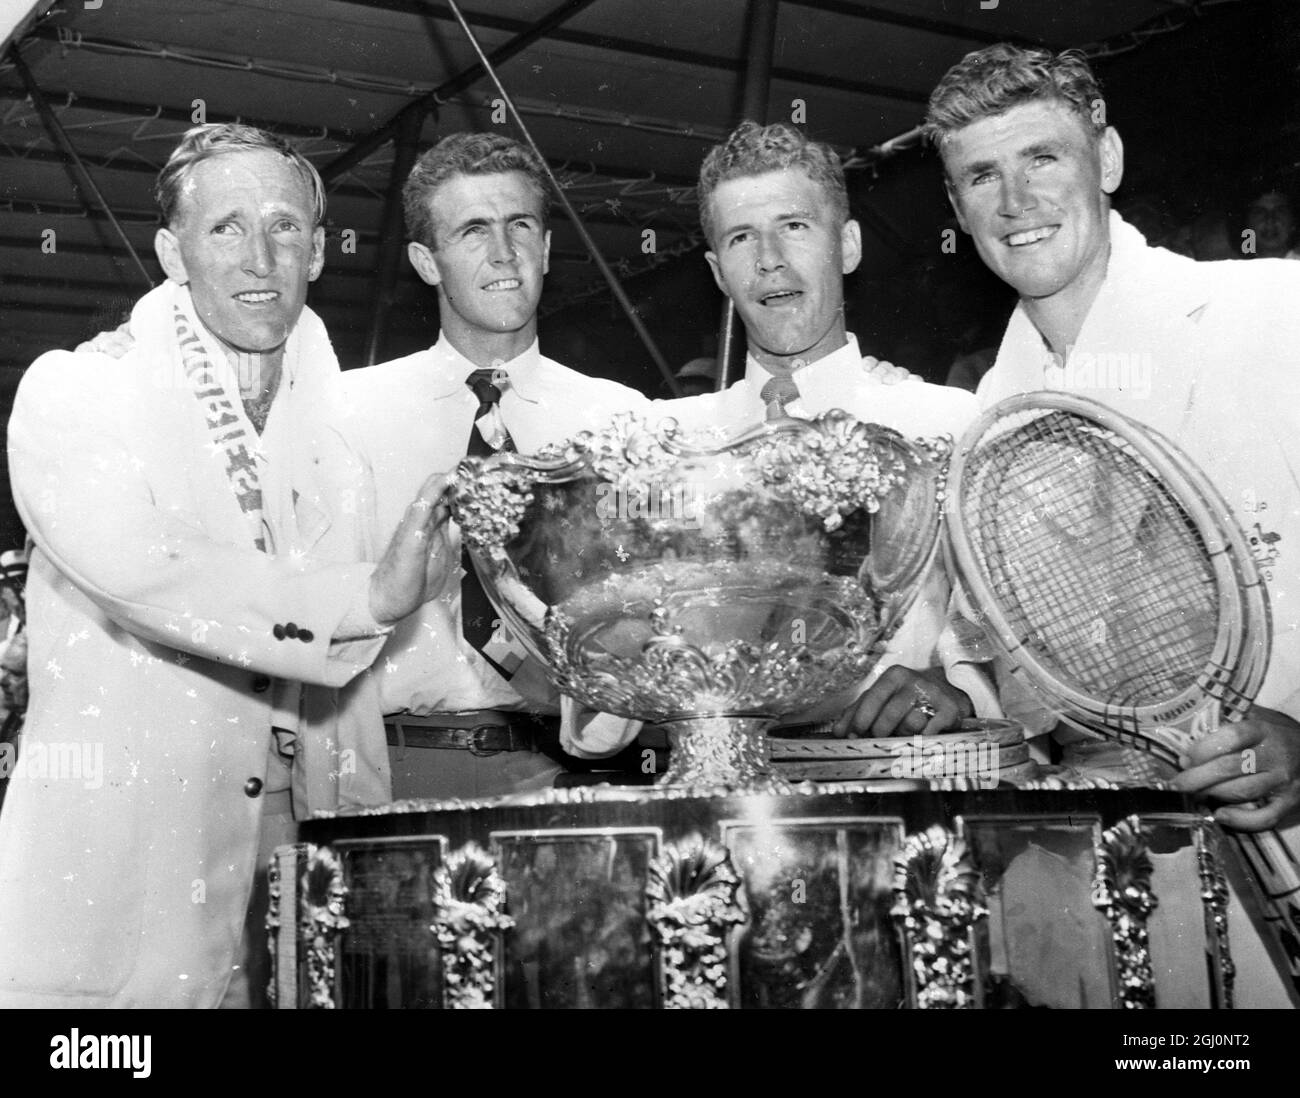 Victorious in pivotal doubles match , Australia's John Bromwich and Frank Sedgman pipped the Davis Cup from Americas clutches beating Ted Schroeder and Gardner Mulloy . Photos shows members of the Australian team LtoR John Bromwich , Frank McGregor , George Worthington and Frank Sedgman with the Davis Cup 1 September 1950 Stock Photo